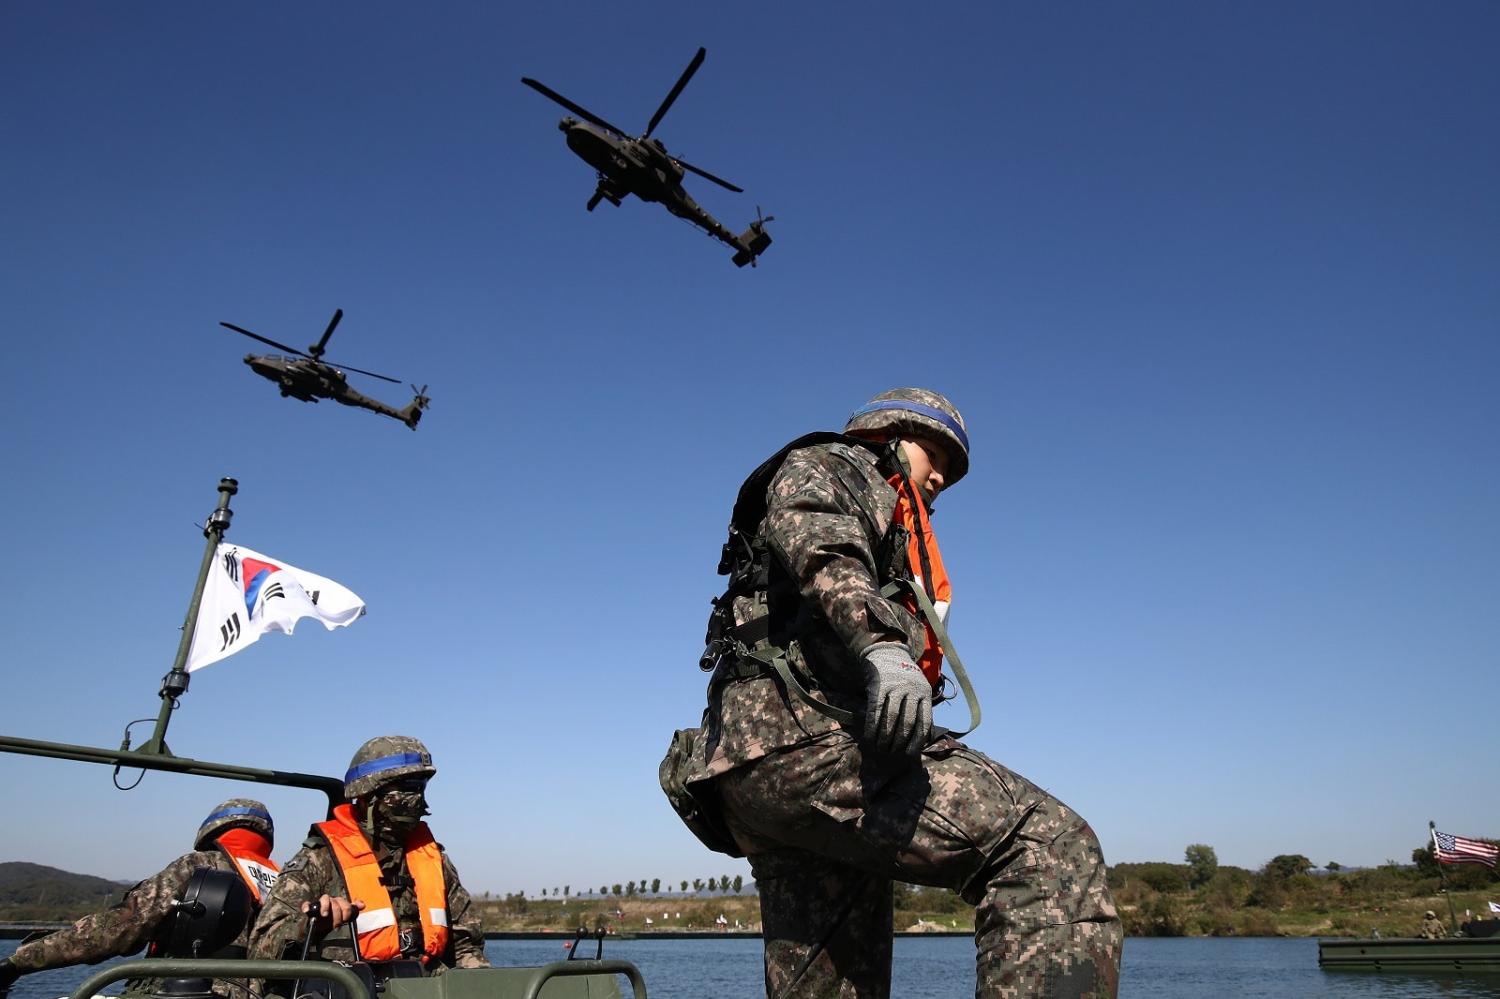 South Korean soldiers participate in a river crossing exercise with US soldiers on 19 October 2022 in Yeoju, South Korea (Chung Sung-Jun/Getty Images)